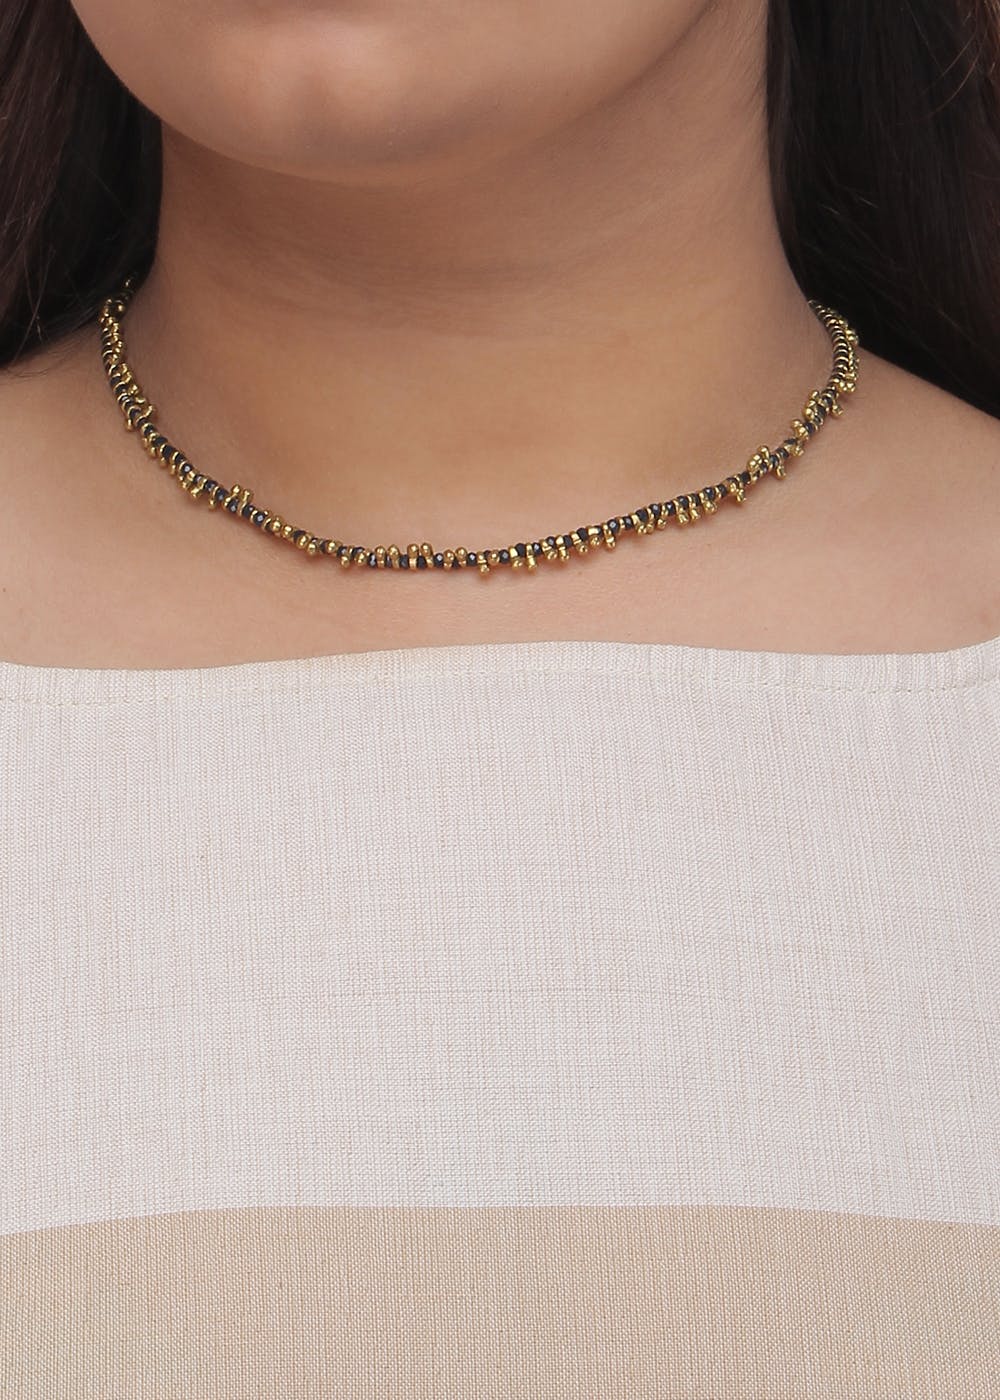 Gold-Toned Ghungroo & Beads Embellished Necklace - Navy